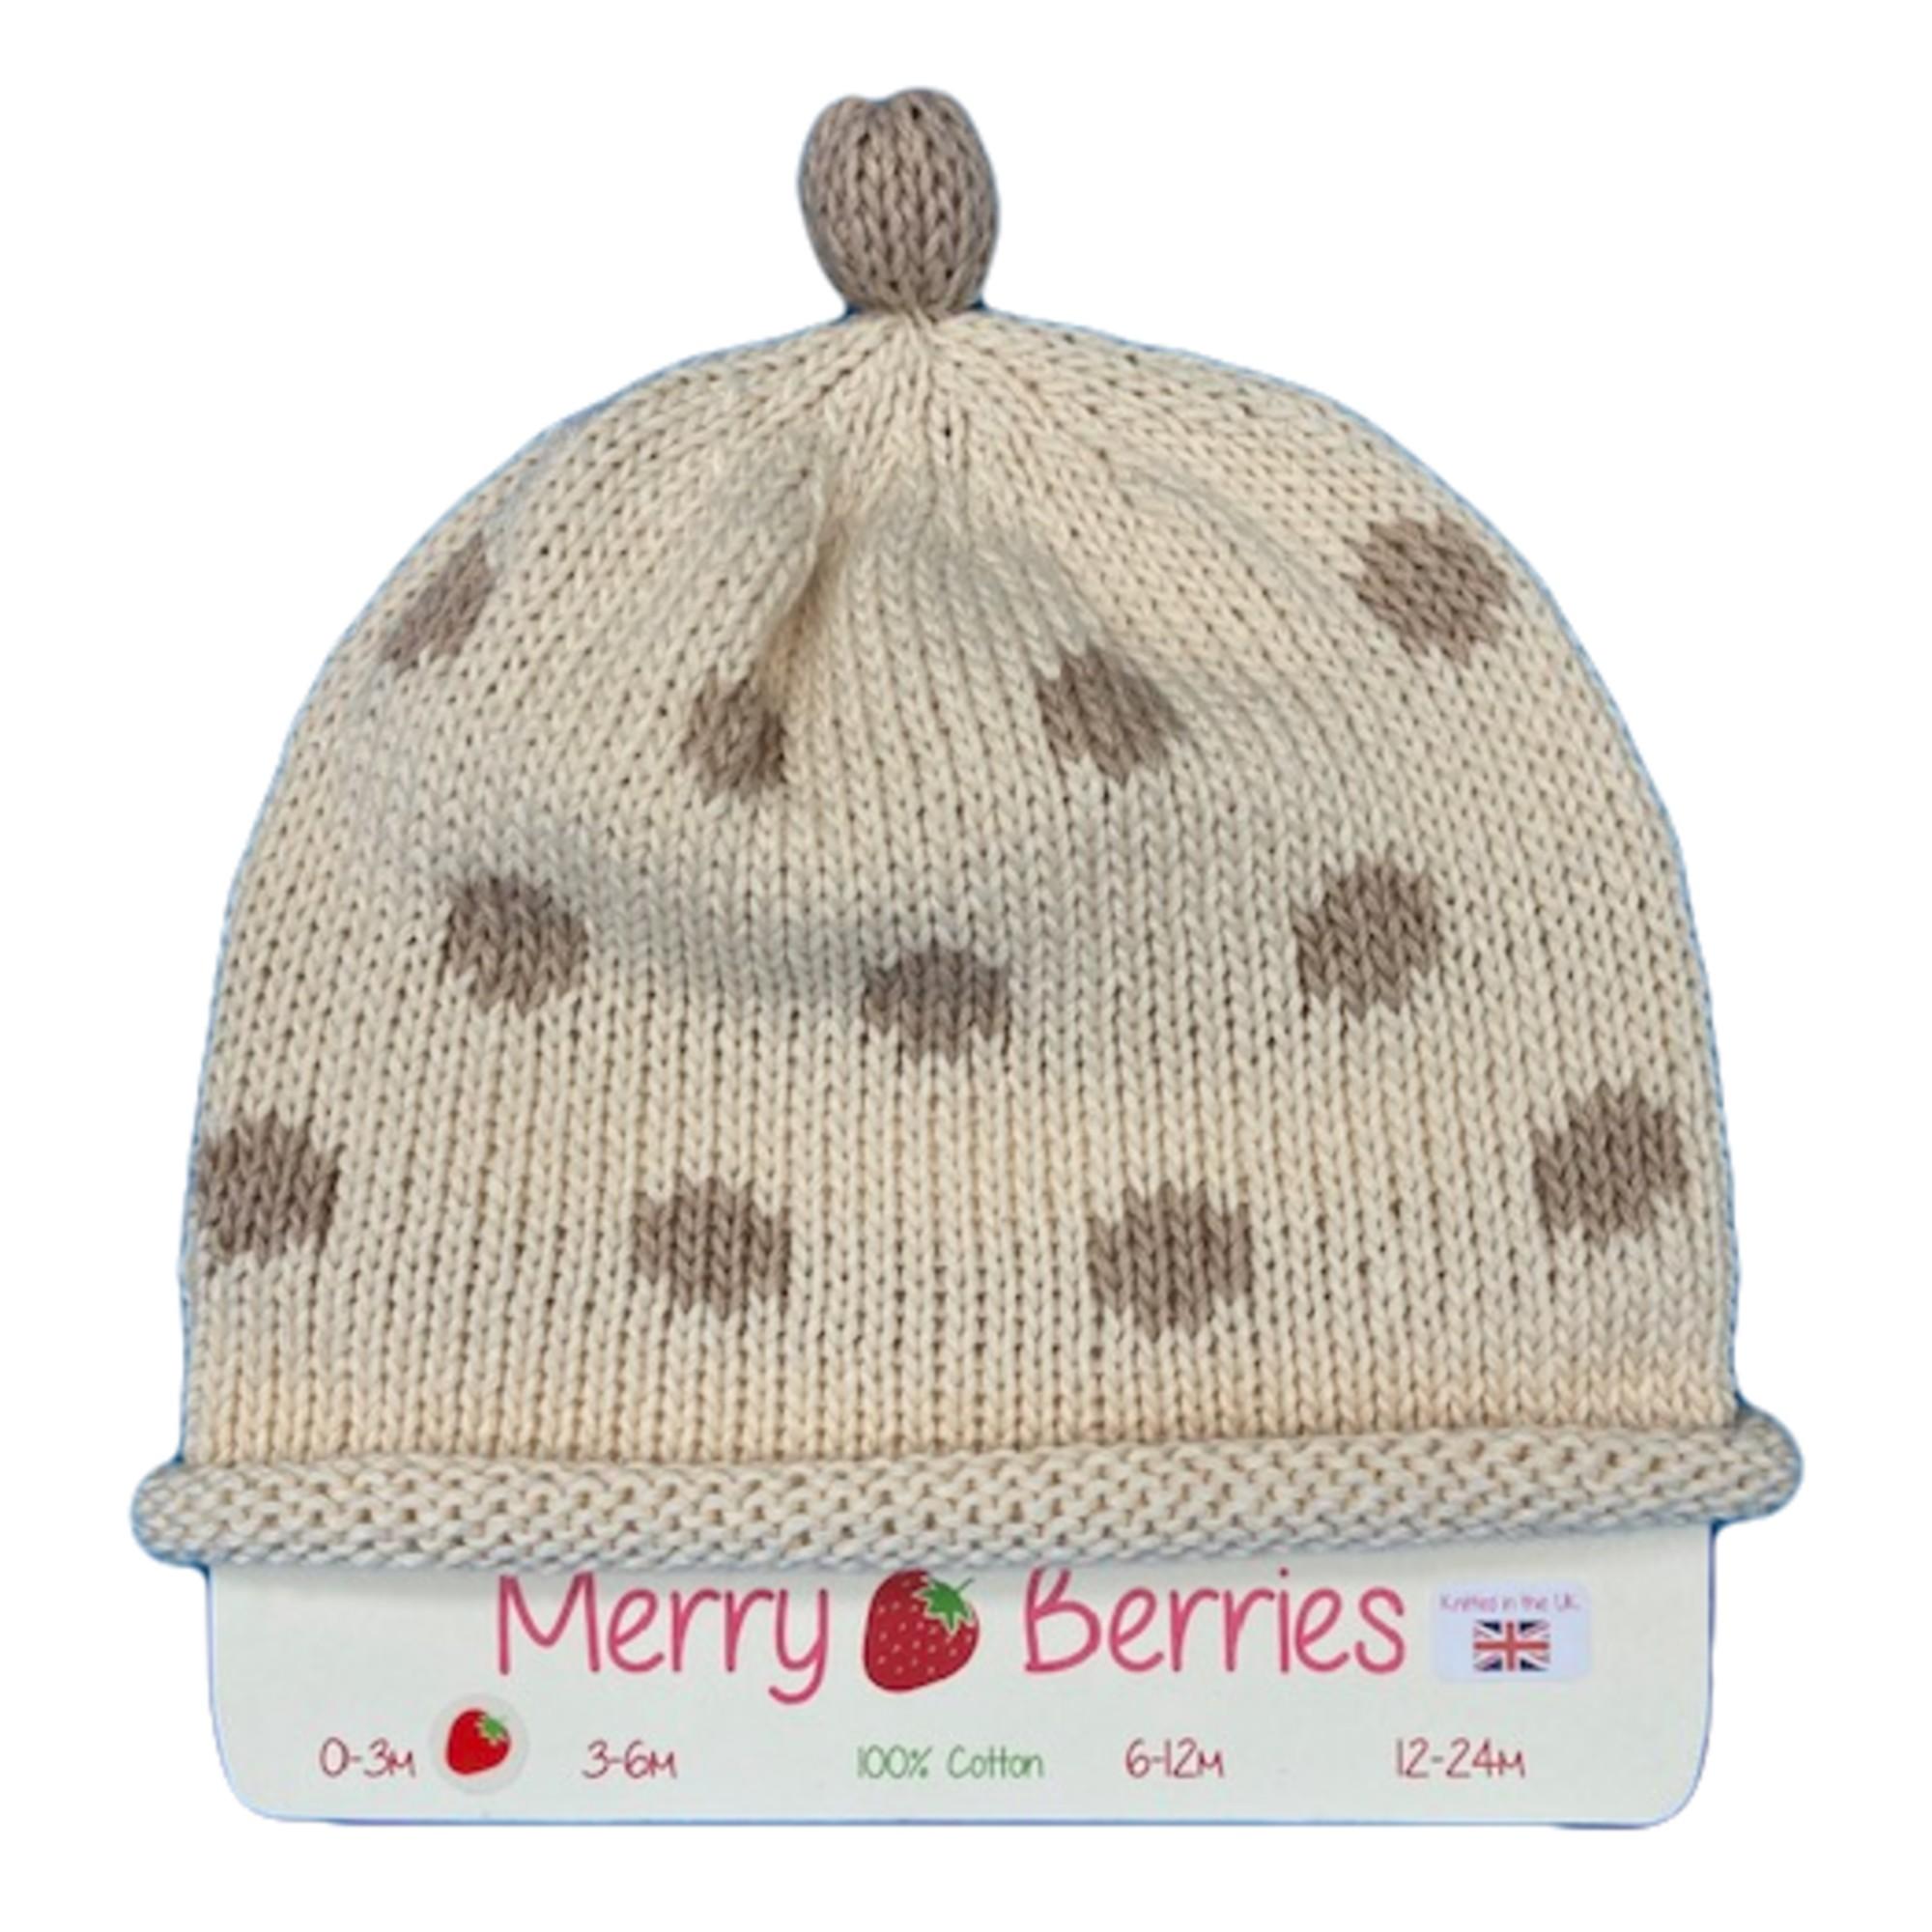 Merry Berries - Oat Spot Knitted baby Hat-0-24mths-Cotton